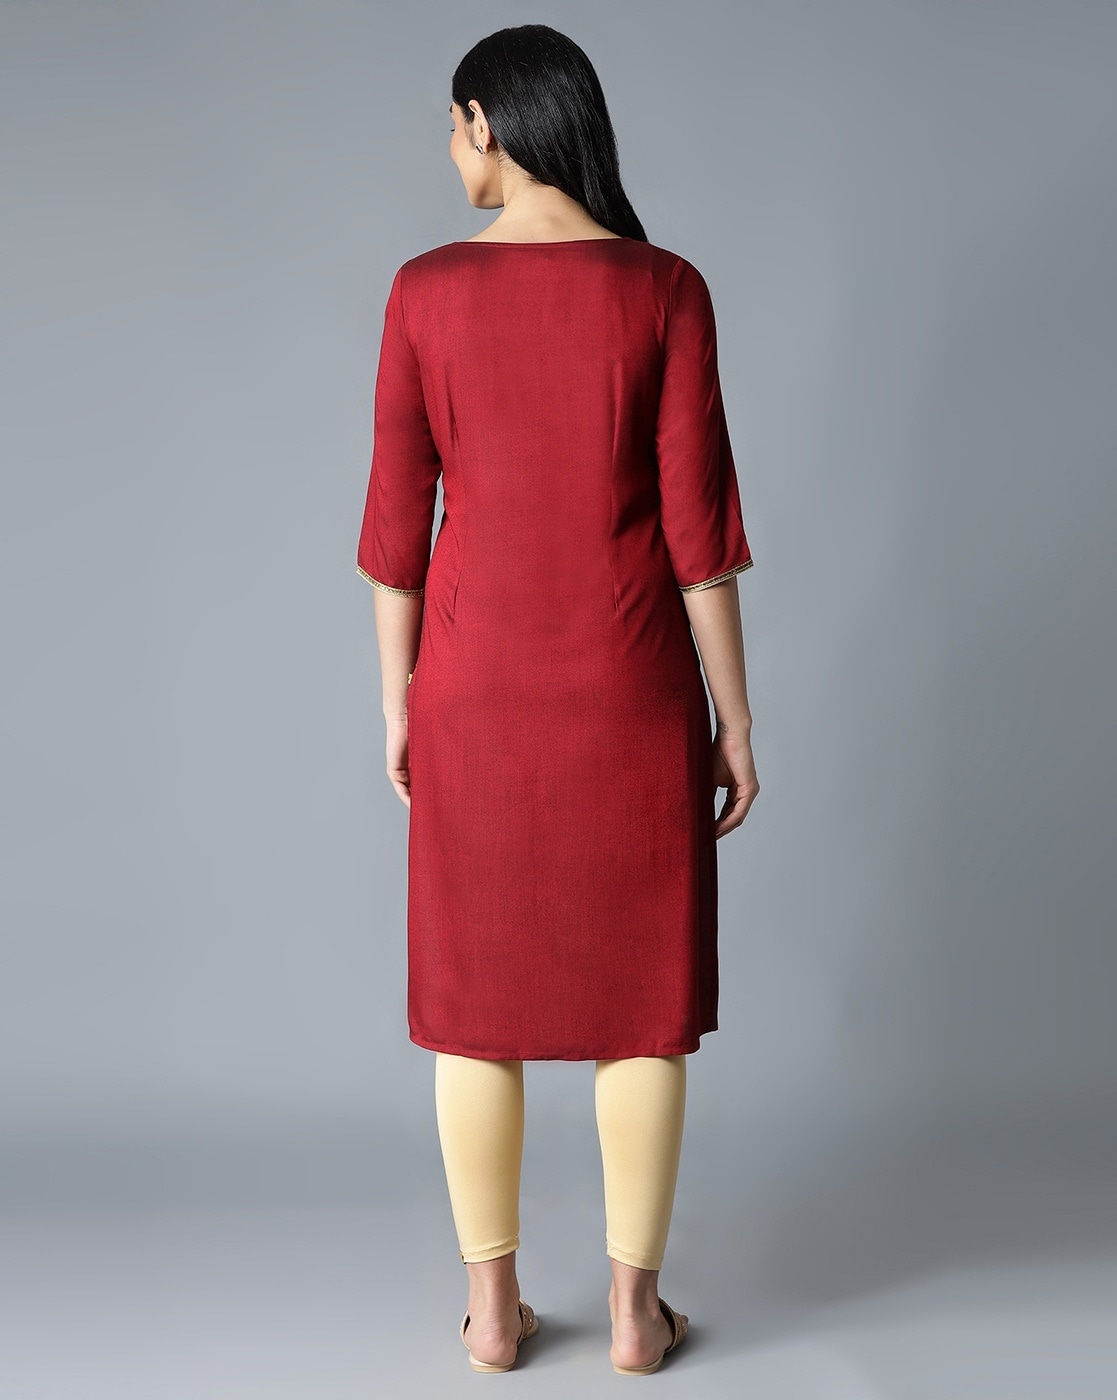 Full Sleeves Boat Neck Red Kurti in Kollam - Dealers, Manufacturers &  Suppliers -Justdial